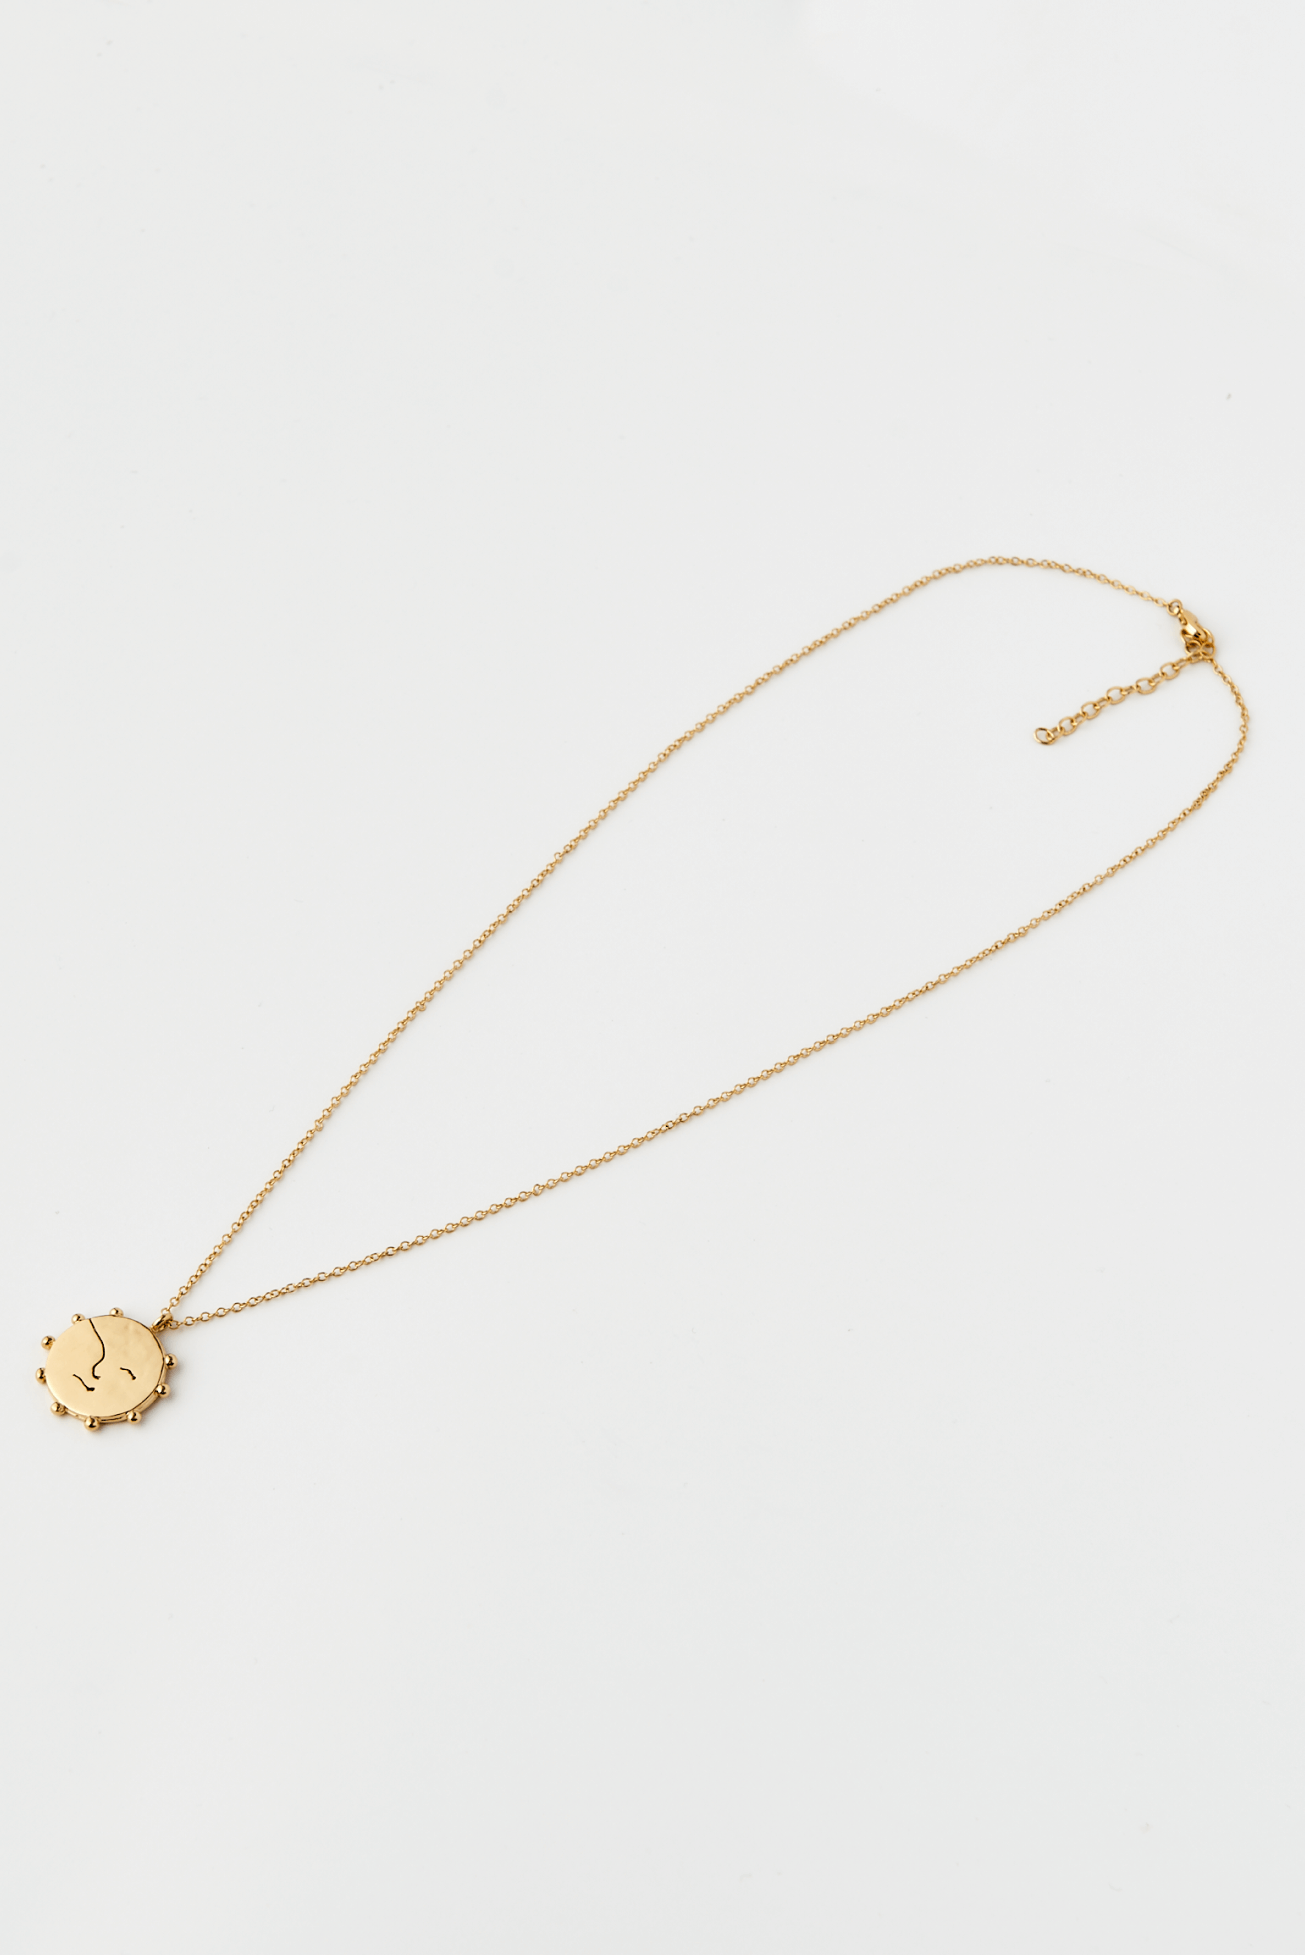 Shop Juwa Pendant and Chain Necklace by We Are NBO on Arrai. Discover stylish, affordable clothing, jewelry, handbags and unique handmade pieces from top Kenyan & African fashion brands prioritising sustainability and quality craftsmanship.